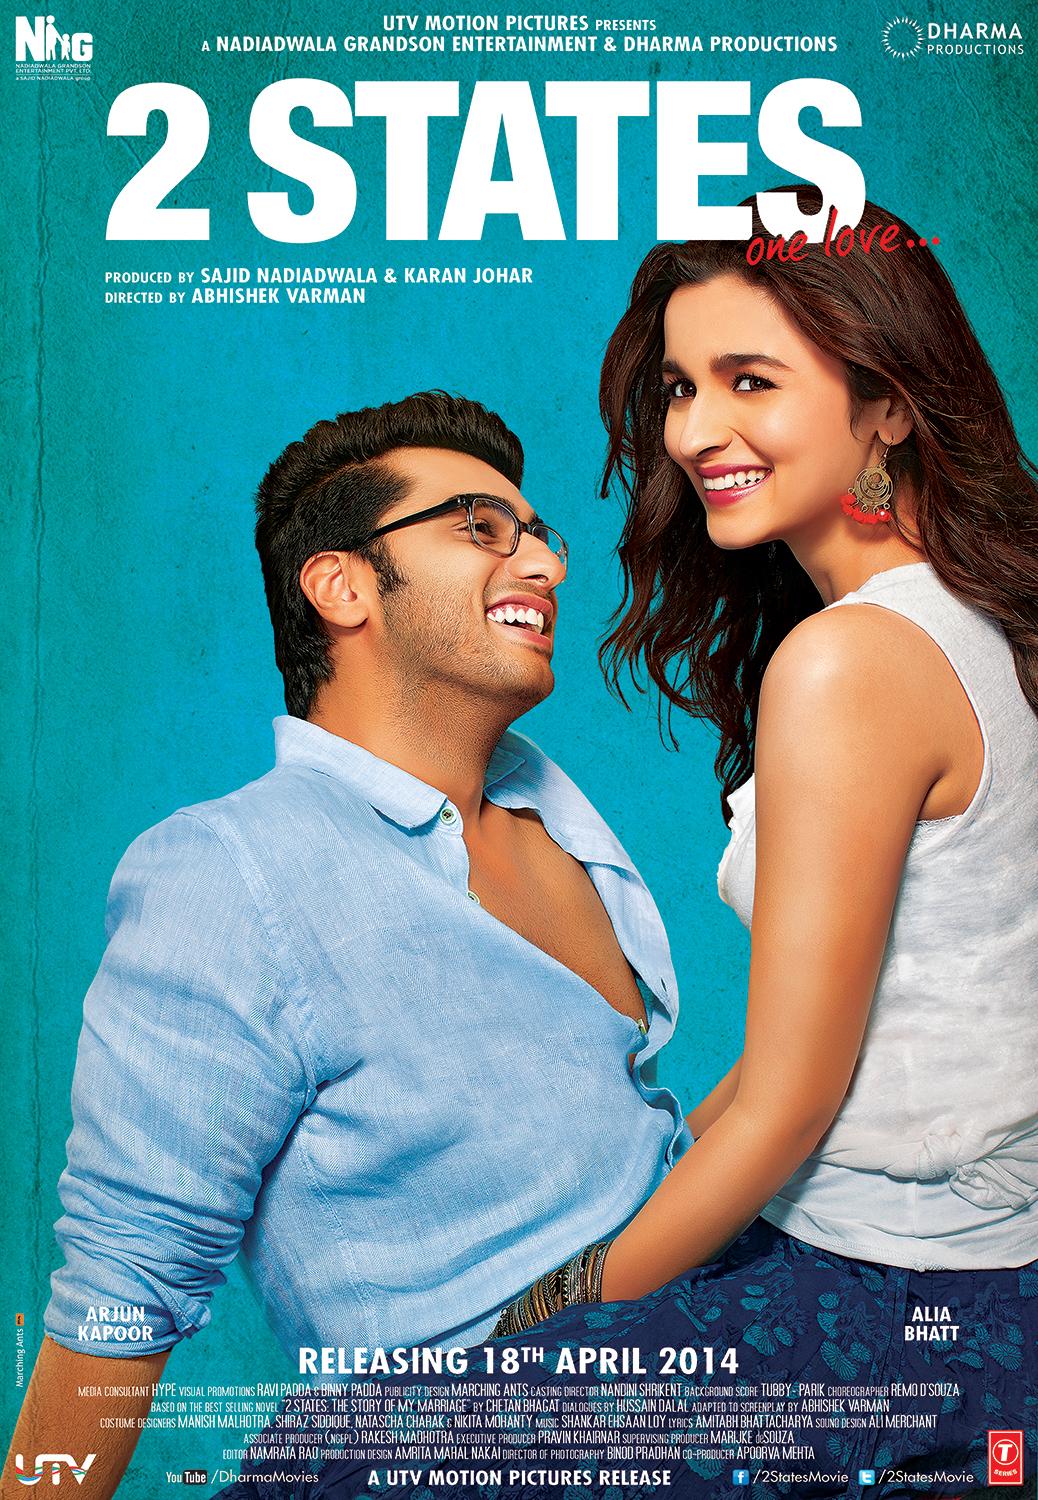 However, their journey to eternal love is not without hurdles. The central conflict of the film lies in the cultural differences between Krish and Ananya's families. As they decide to tie the knot and embark on their marital journey, they are faced with the daunting task of convincing their conservative parents to accept their cross-cultural relationship.